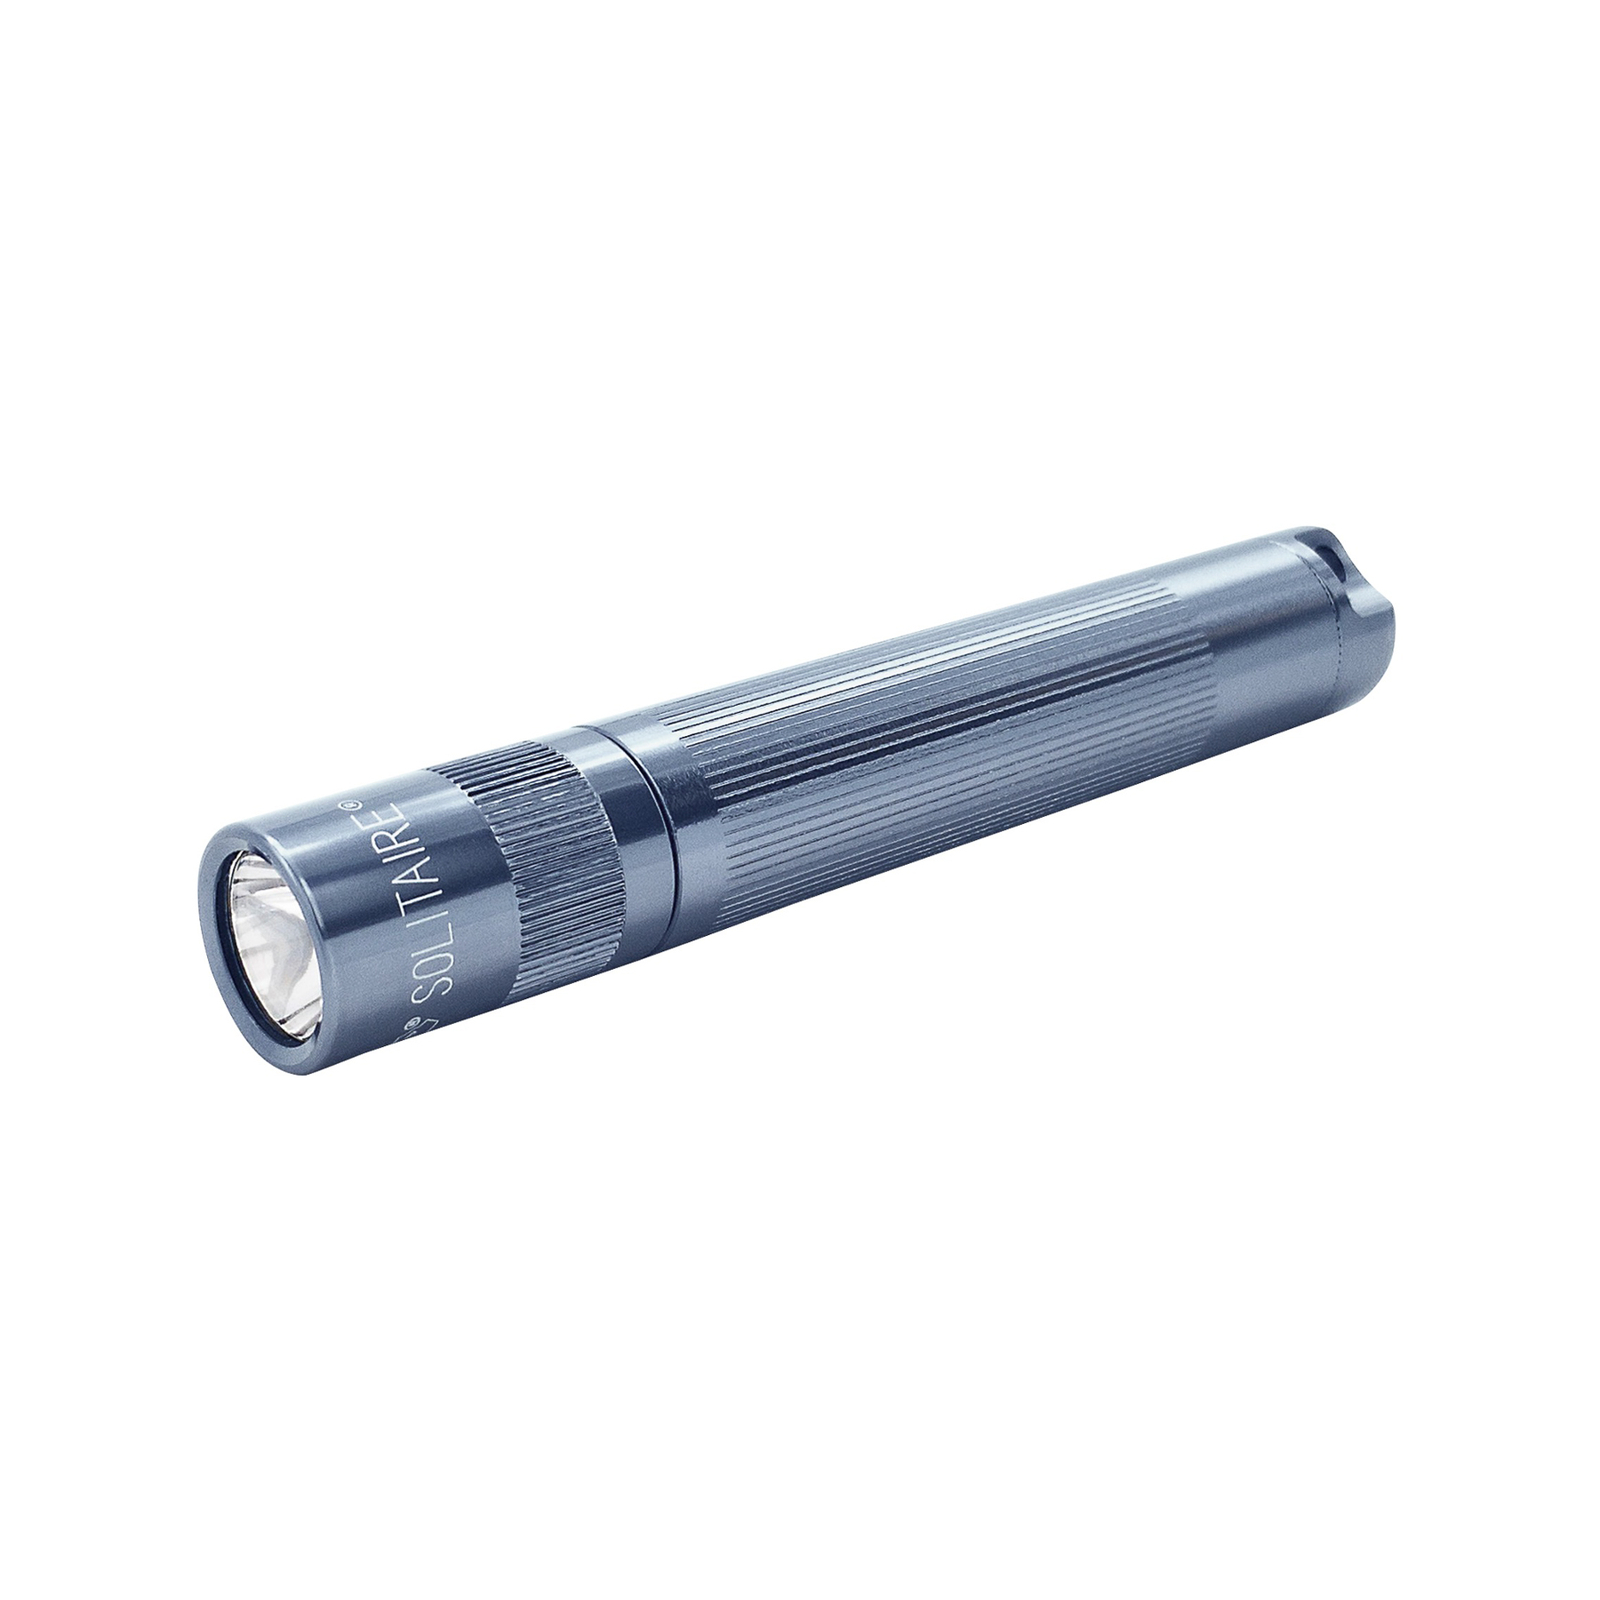 Lampe de poche LED Maglite Solitaire, 1-Cell AAA, Boxer, grise